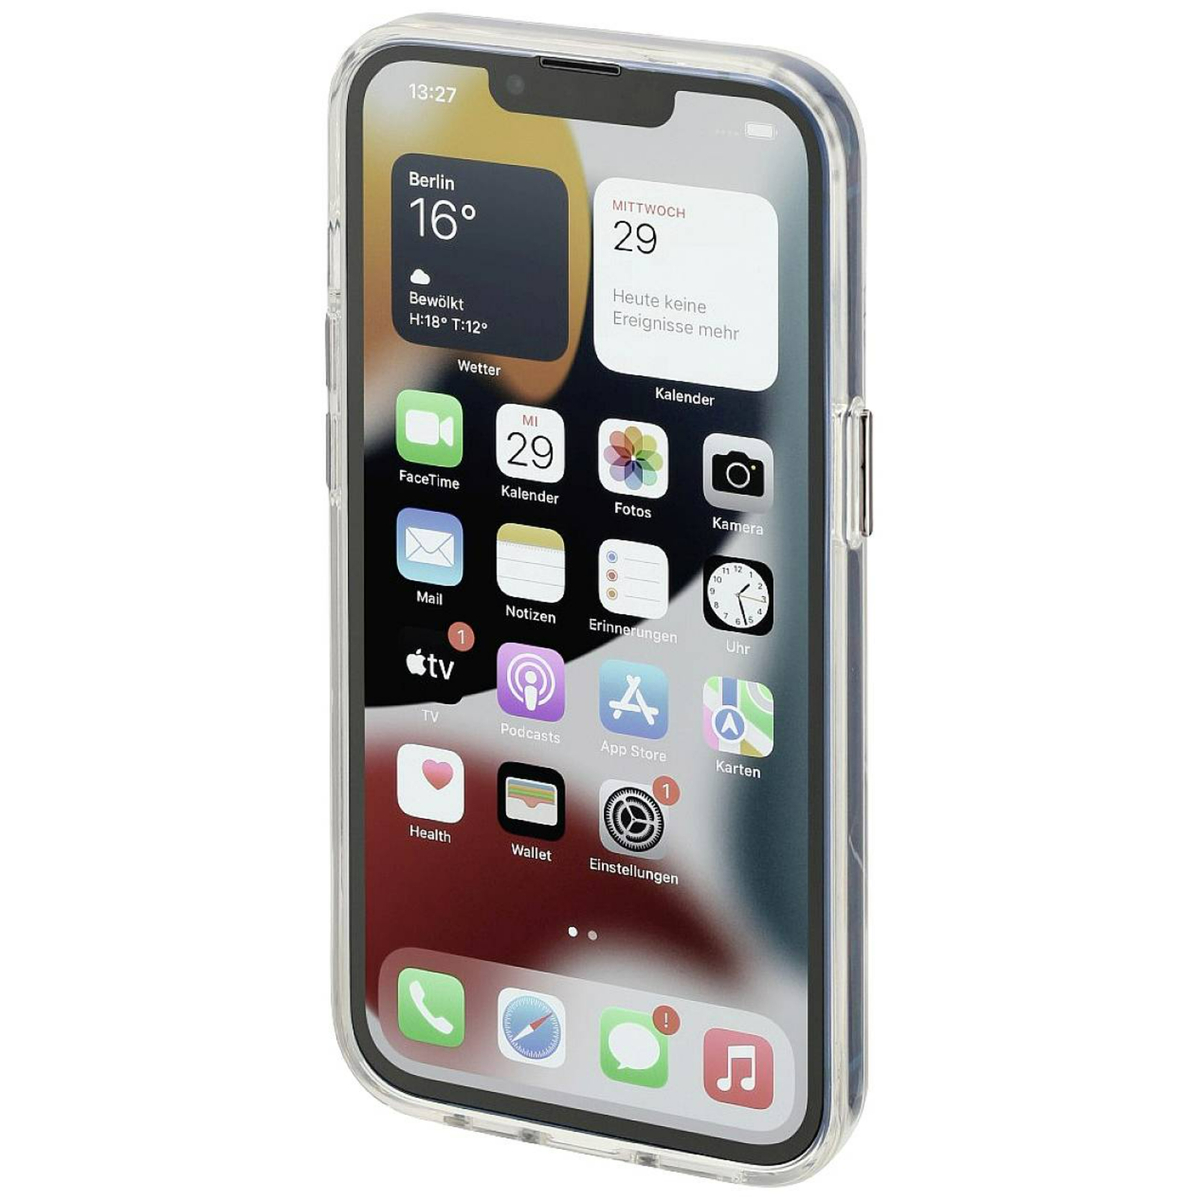 Hama Mag Case Safety Cover for Apple iPhone 14 Pro Max, Clear, 215561